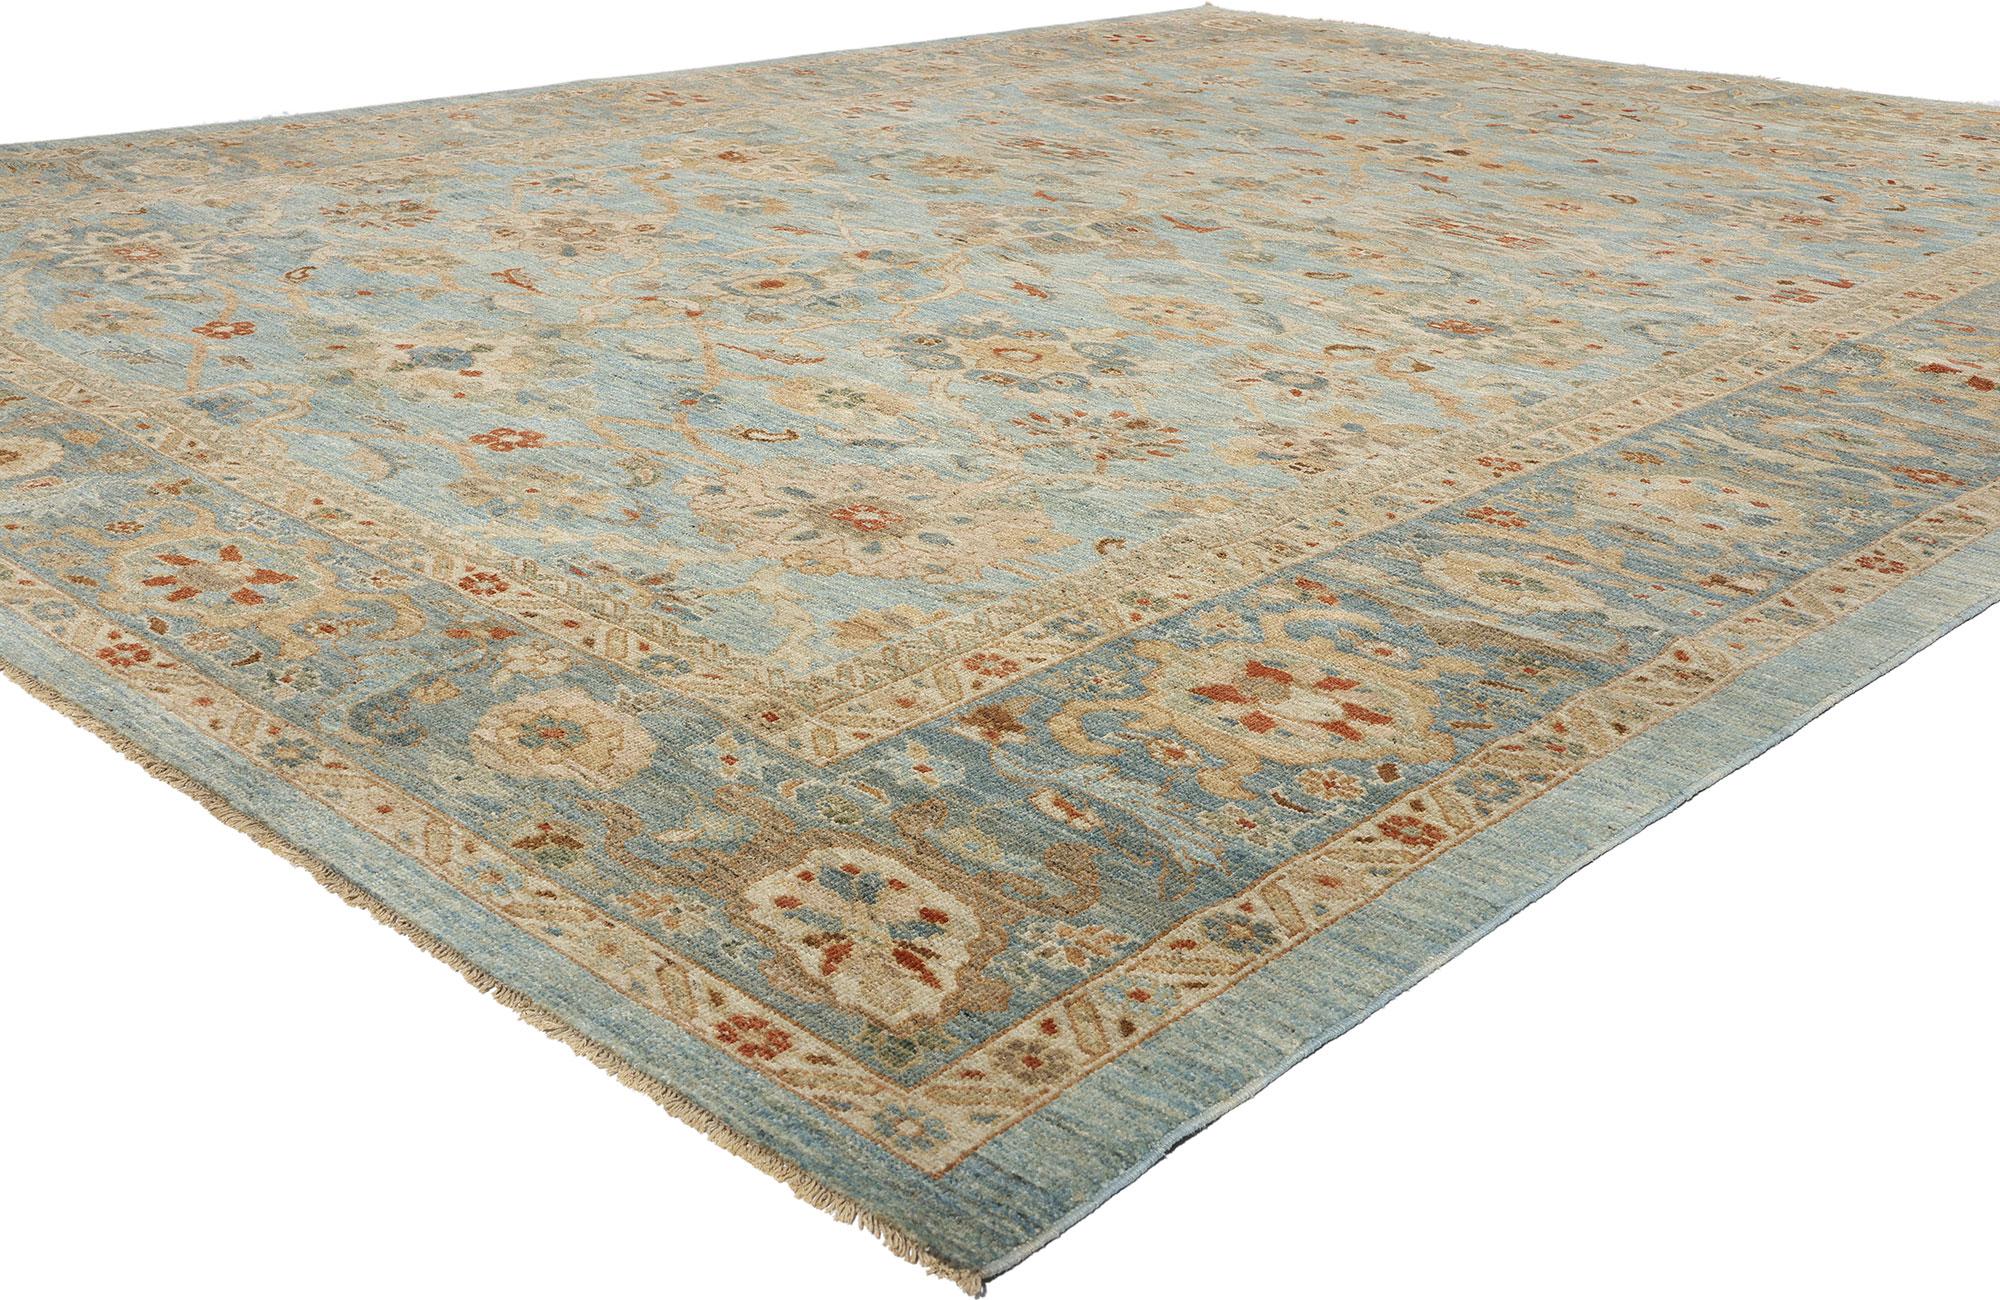 61294 Modern Sky Blue Persian Sultanabad Rug, 12'03 x 15'10. Hailing from Iran's Sultanabad region, Persian Sultanabad rugs are celebrated for their outstanding craftsmanship, durable materials, and elaborate designs. Handcrafted with meticulous